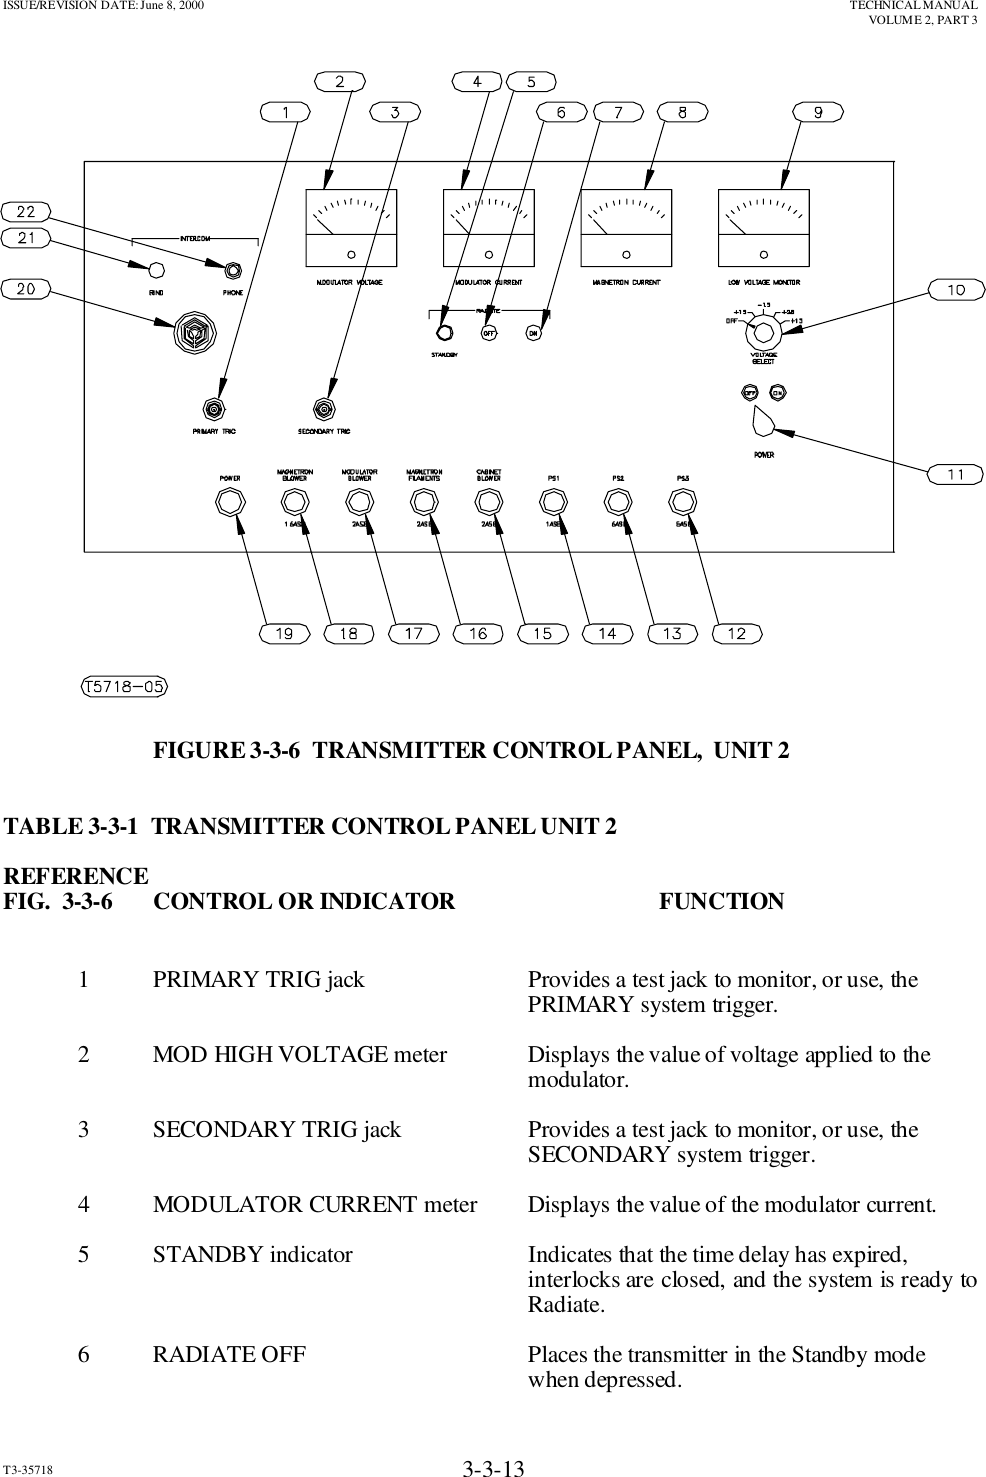 ISSUE/REVISION DATE: June 8, 2000 TECHNICAL MANUALVOLUME 2, PART 3T3-35718 3-3-13FIGURE 3-3-6  TRANSMITTER CONTROL PANEL,  UNIT 2TABLE 3-3-1  TRANSMITTER CONTROL PANEL UNIT 2REFERENCEFIG.  3-3-6  CONTROL OR INDICATOR FUNCTION1  PRIMARY TRIG jack Provides a test jack to monitor, or use, the PRIMARY system trigger.2 MOD HIGH VOLTAGE meter Displays the value of voltage applied to the modulator.3  SECONDARY TRIG jack Provides a test jack to monitor, or use, the SECONDARY system trigger.    4  MODULATOR CURRENT meter Displays the value of the modulator current.5 STANDBY indicator Indicates that the time delay has expired,interlocks are closed, and the system is ready toRadiate.6 RADIATE OFF Places the transmitter in the Standby mode when depressed.